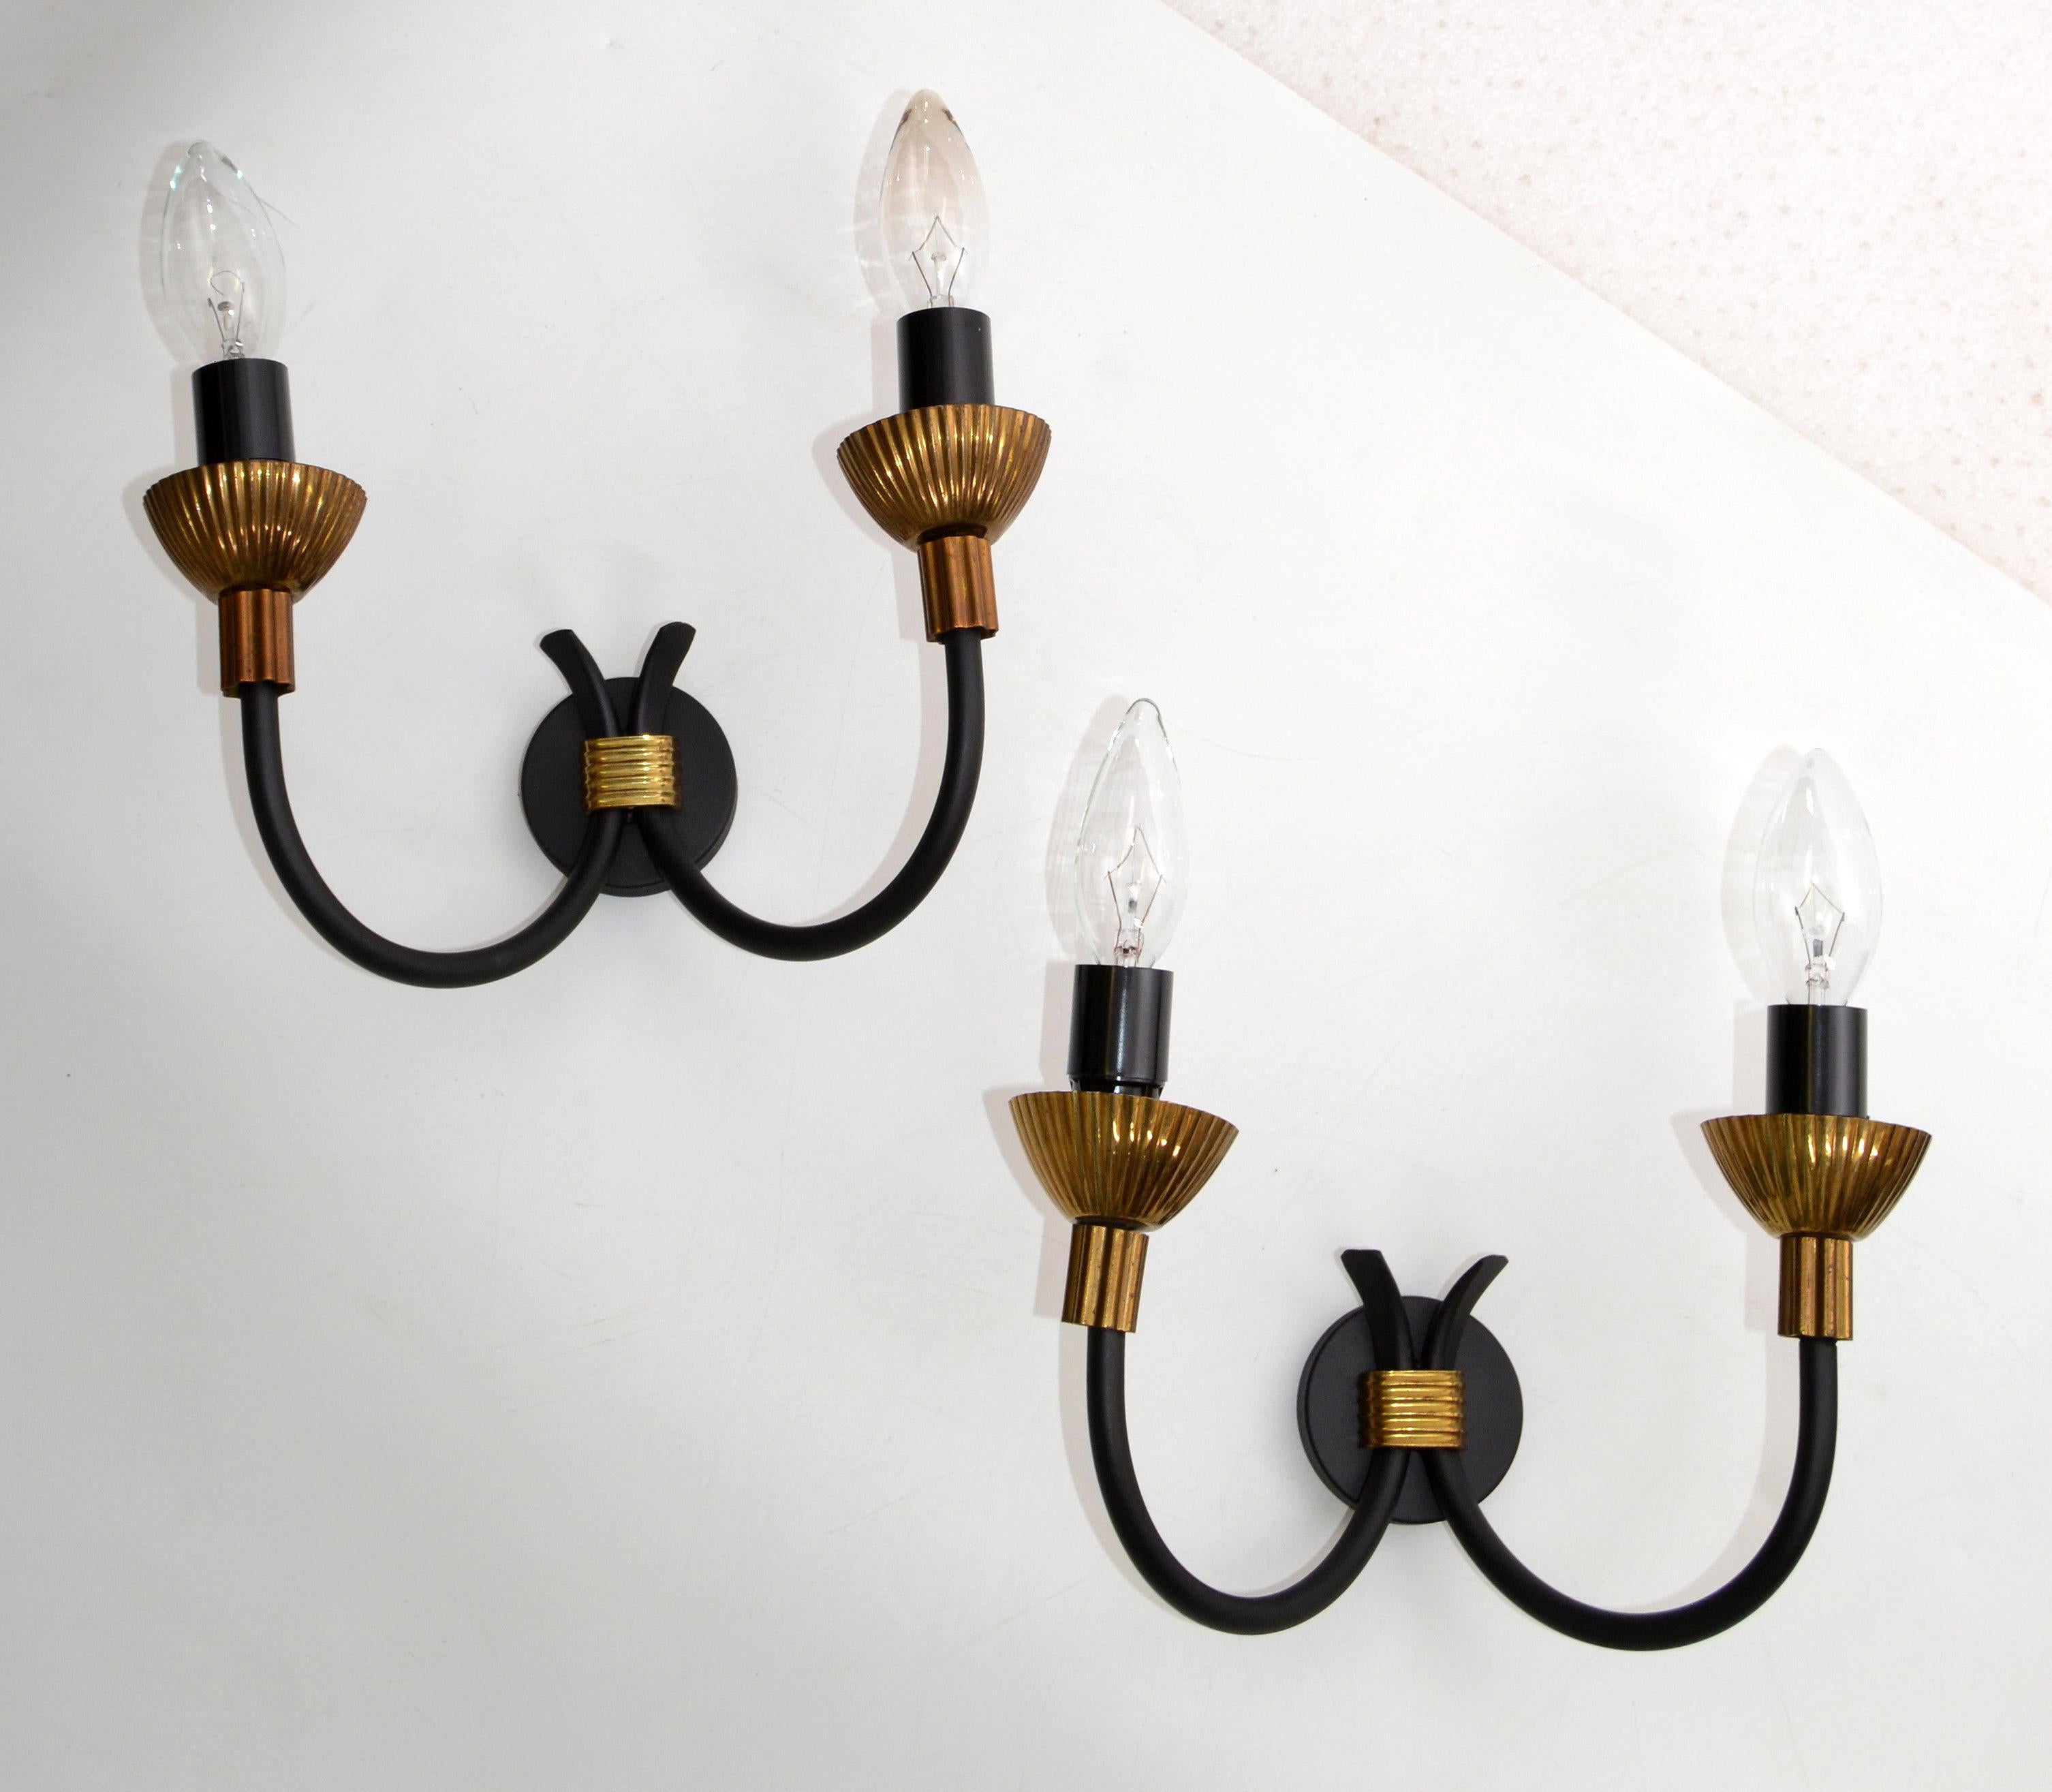 Maison Lunel Pair of Sconces Mid-Century Modern France, 2 pairs Available  7